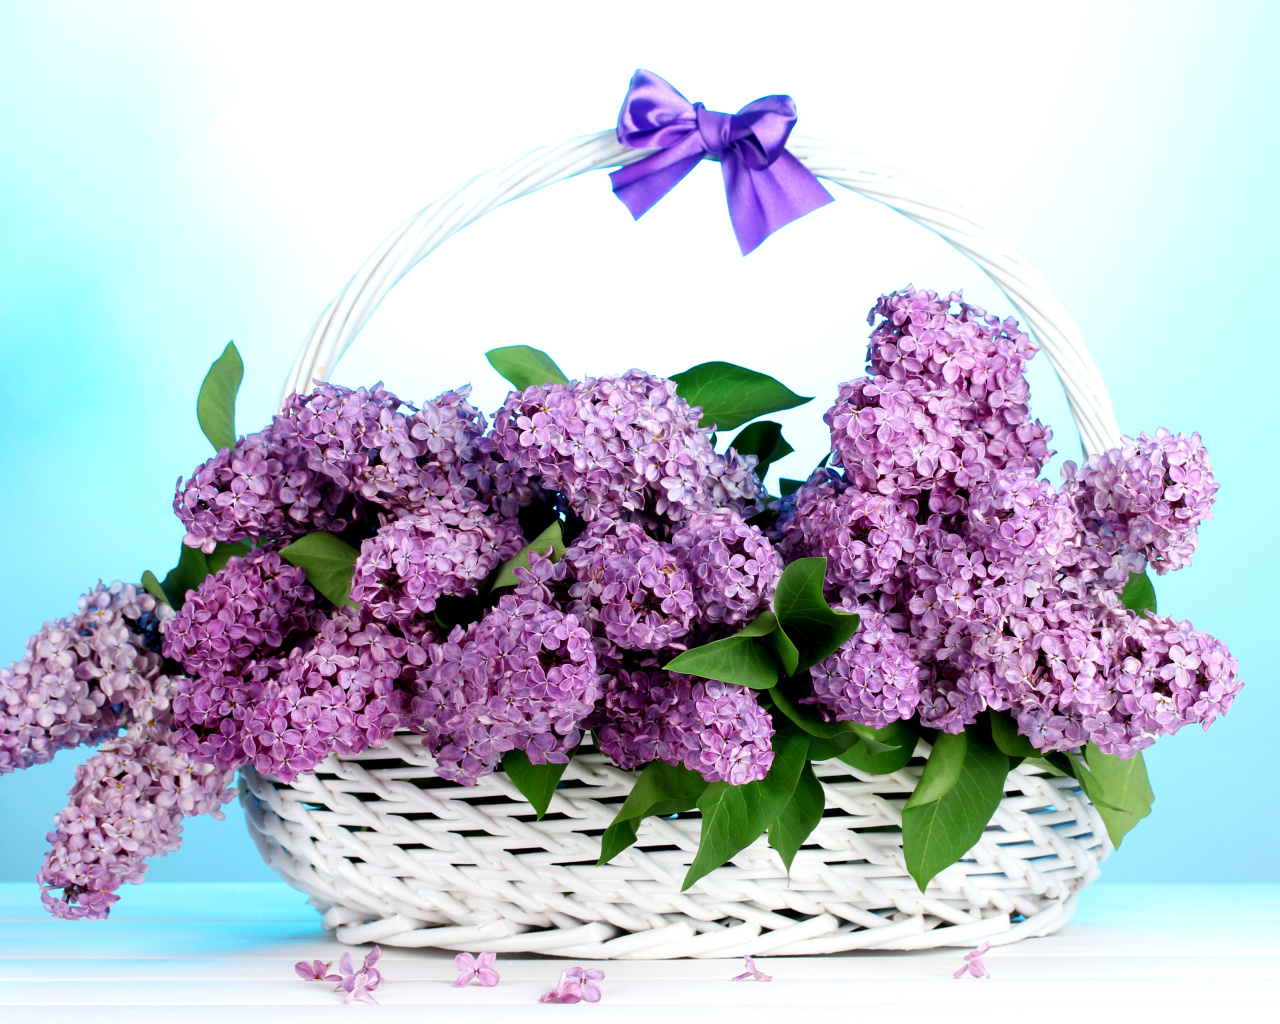 Baskets with lilac flowers wallpaper 1280x1024